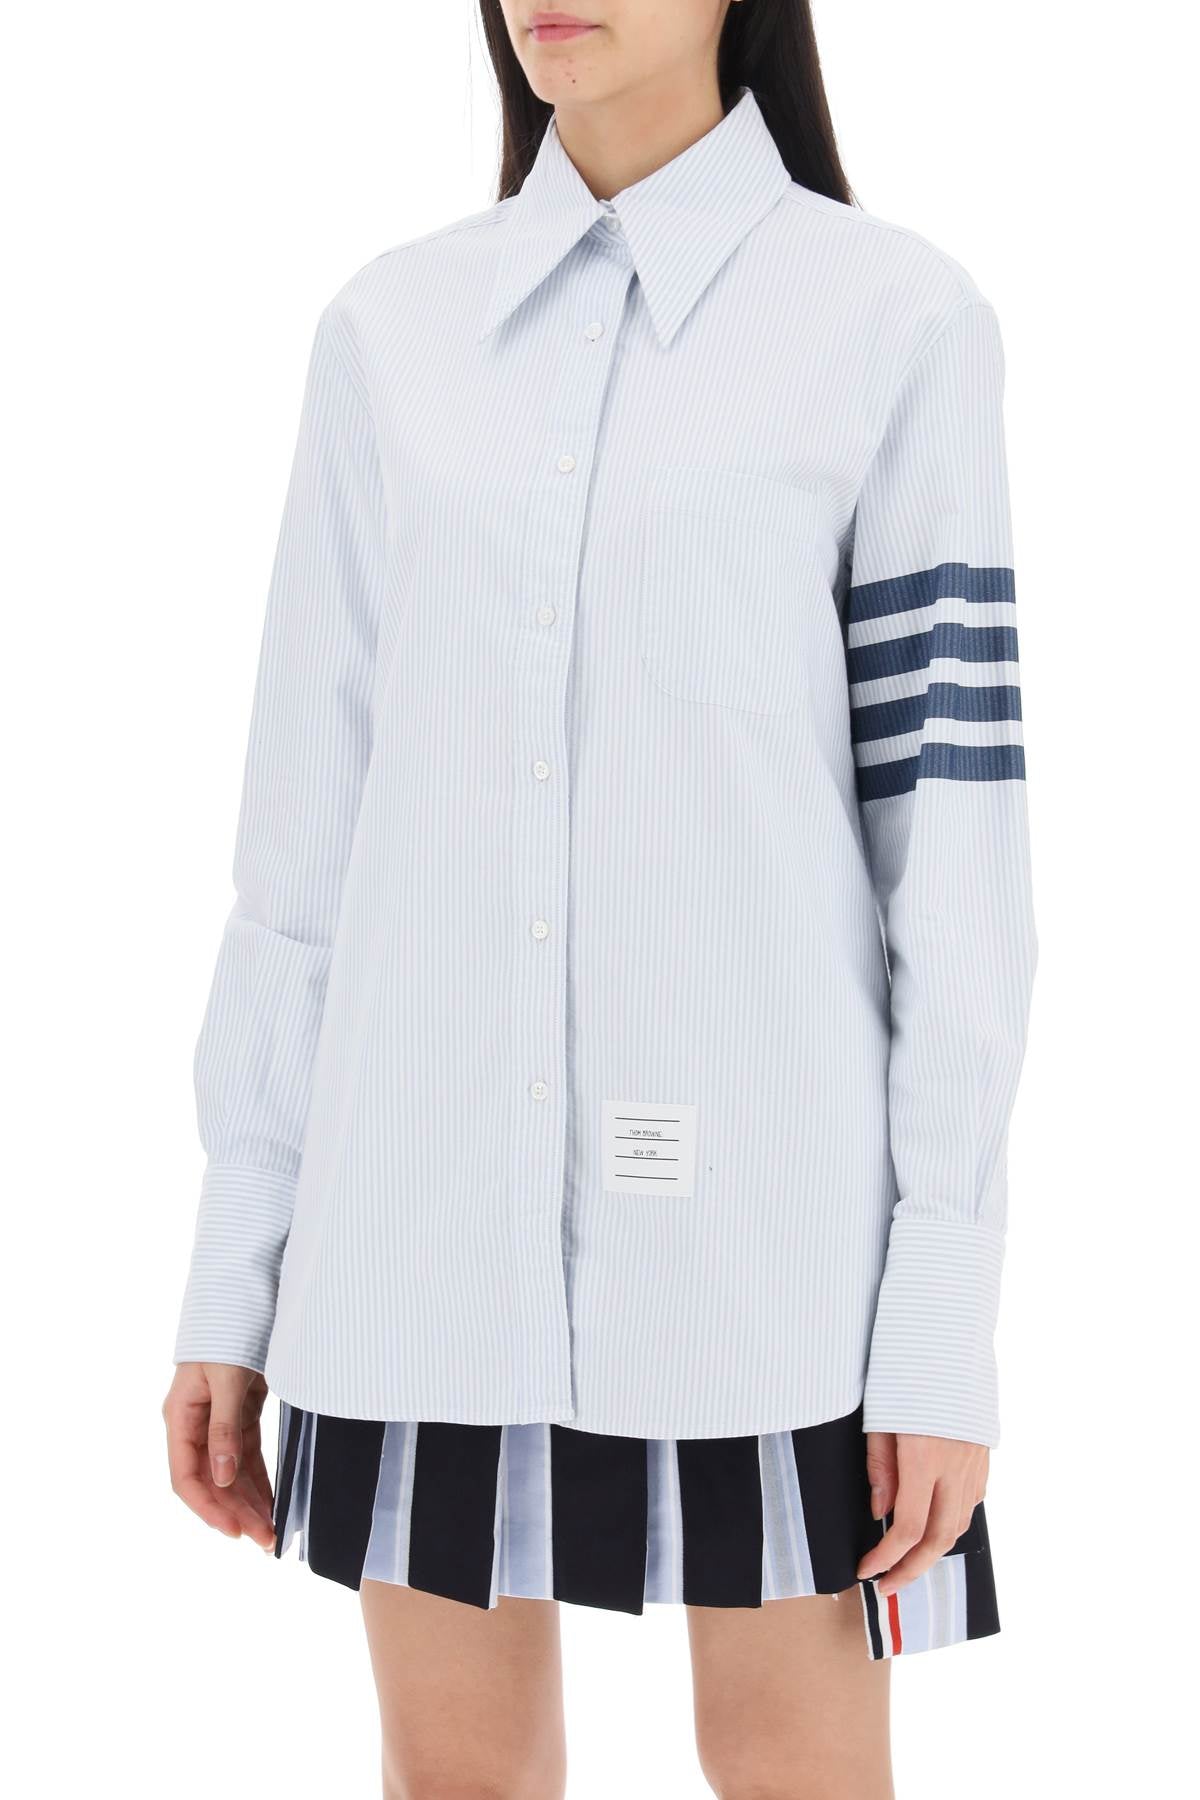 Thom browne striped oxford shirt with pointed collar-3